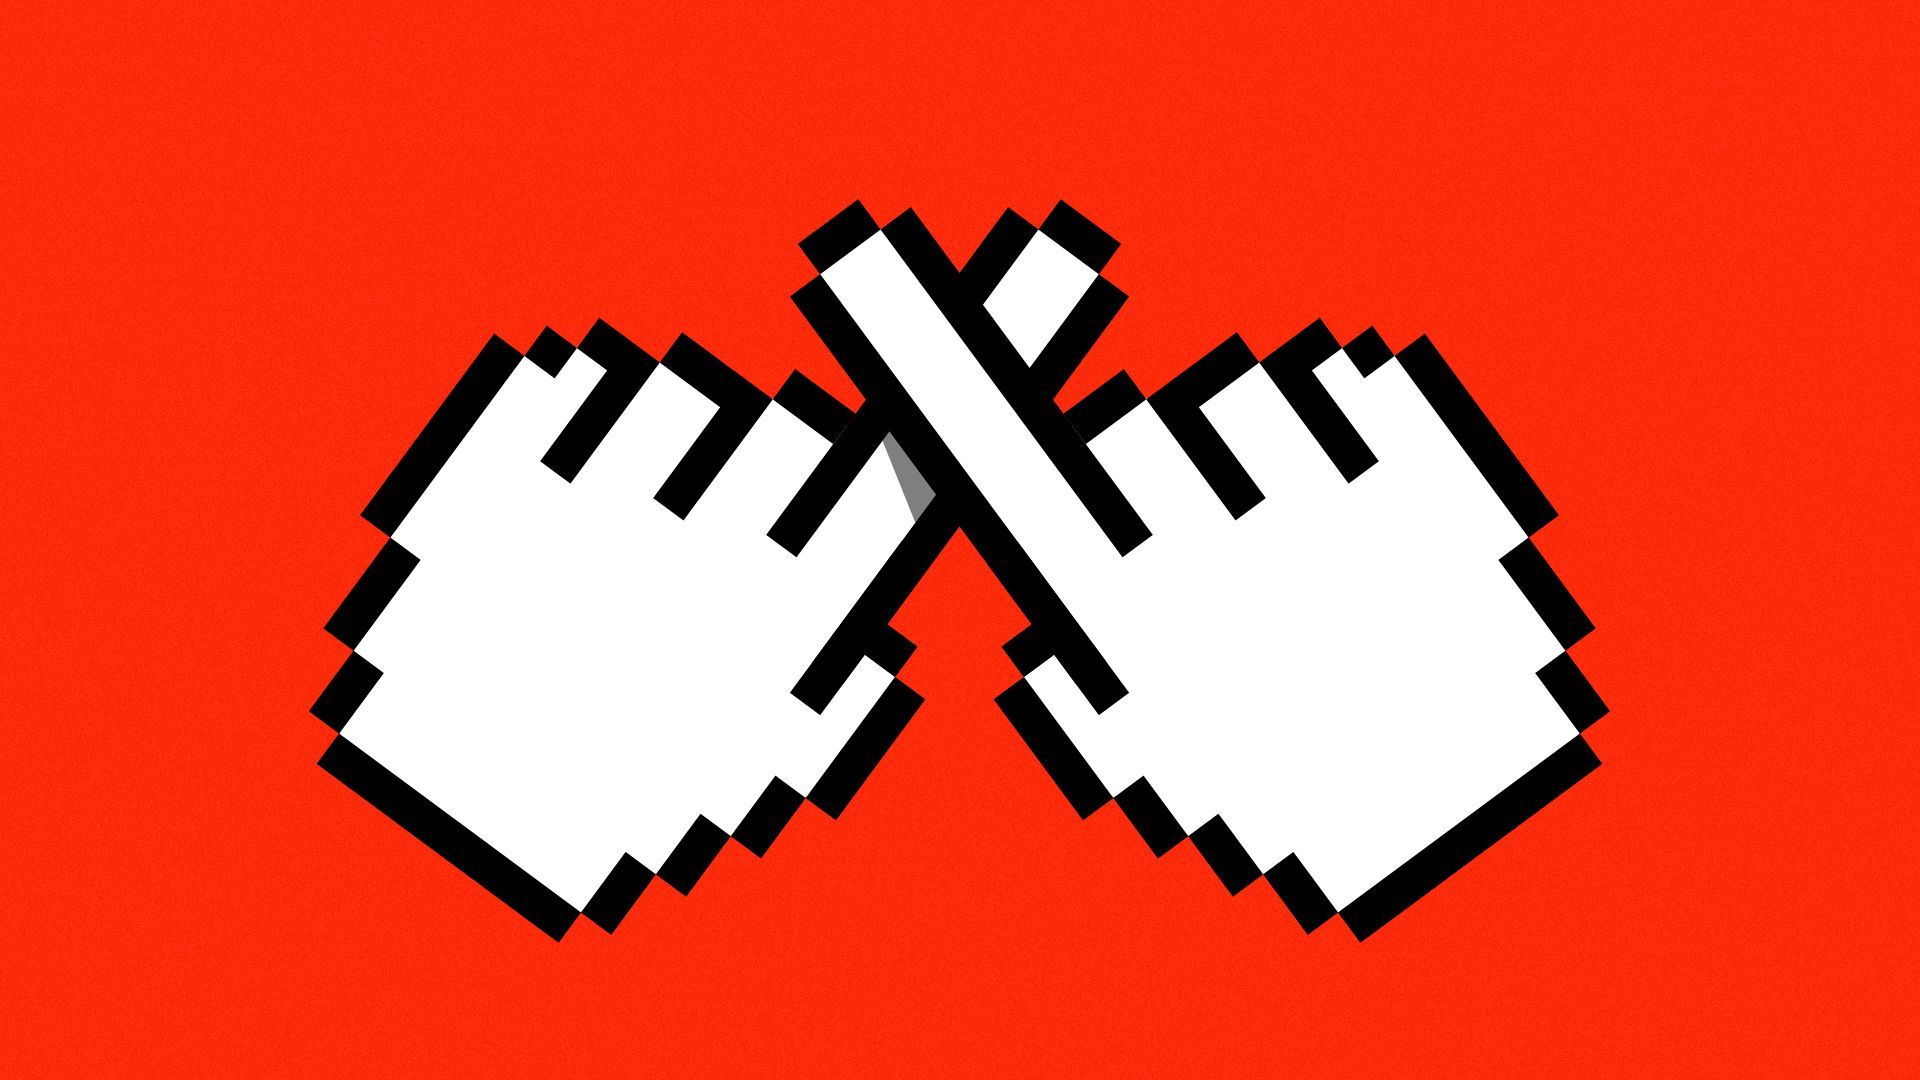 Illustration of two pointing hand cursors making an "X" sign out of the fingers. 